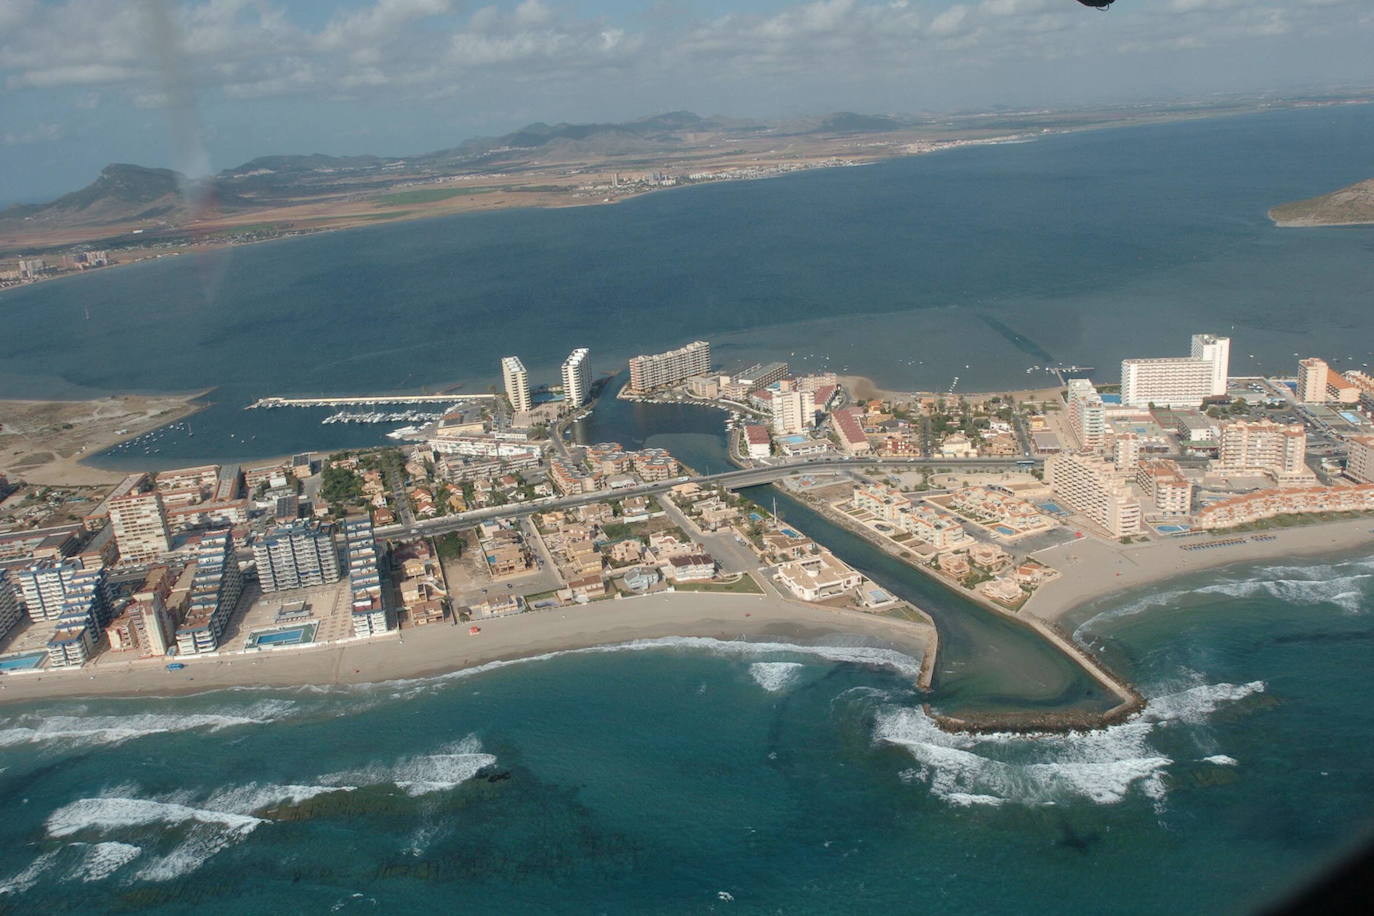 Aerial view of La Manga, in a file photo.